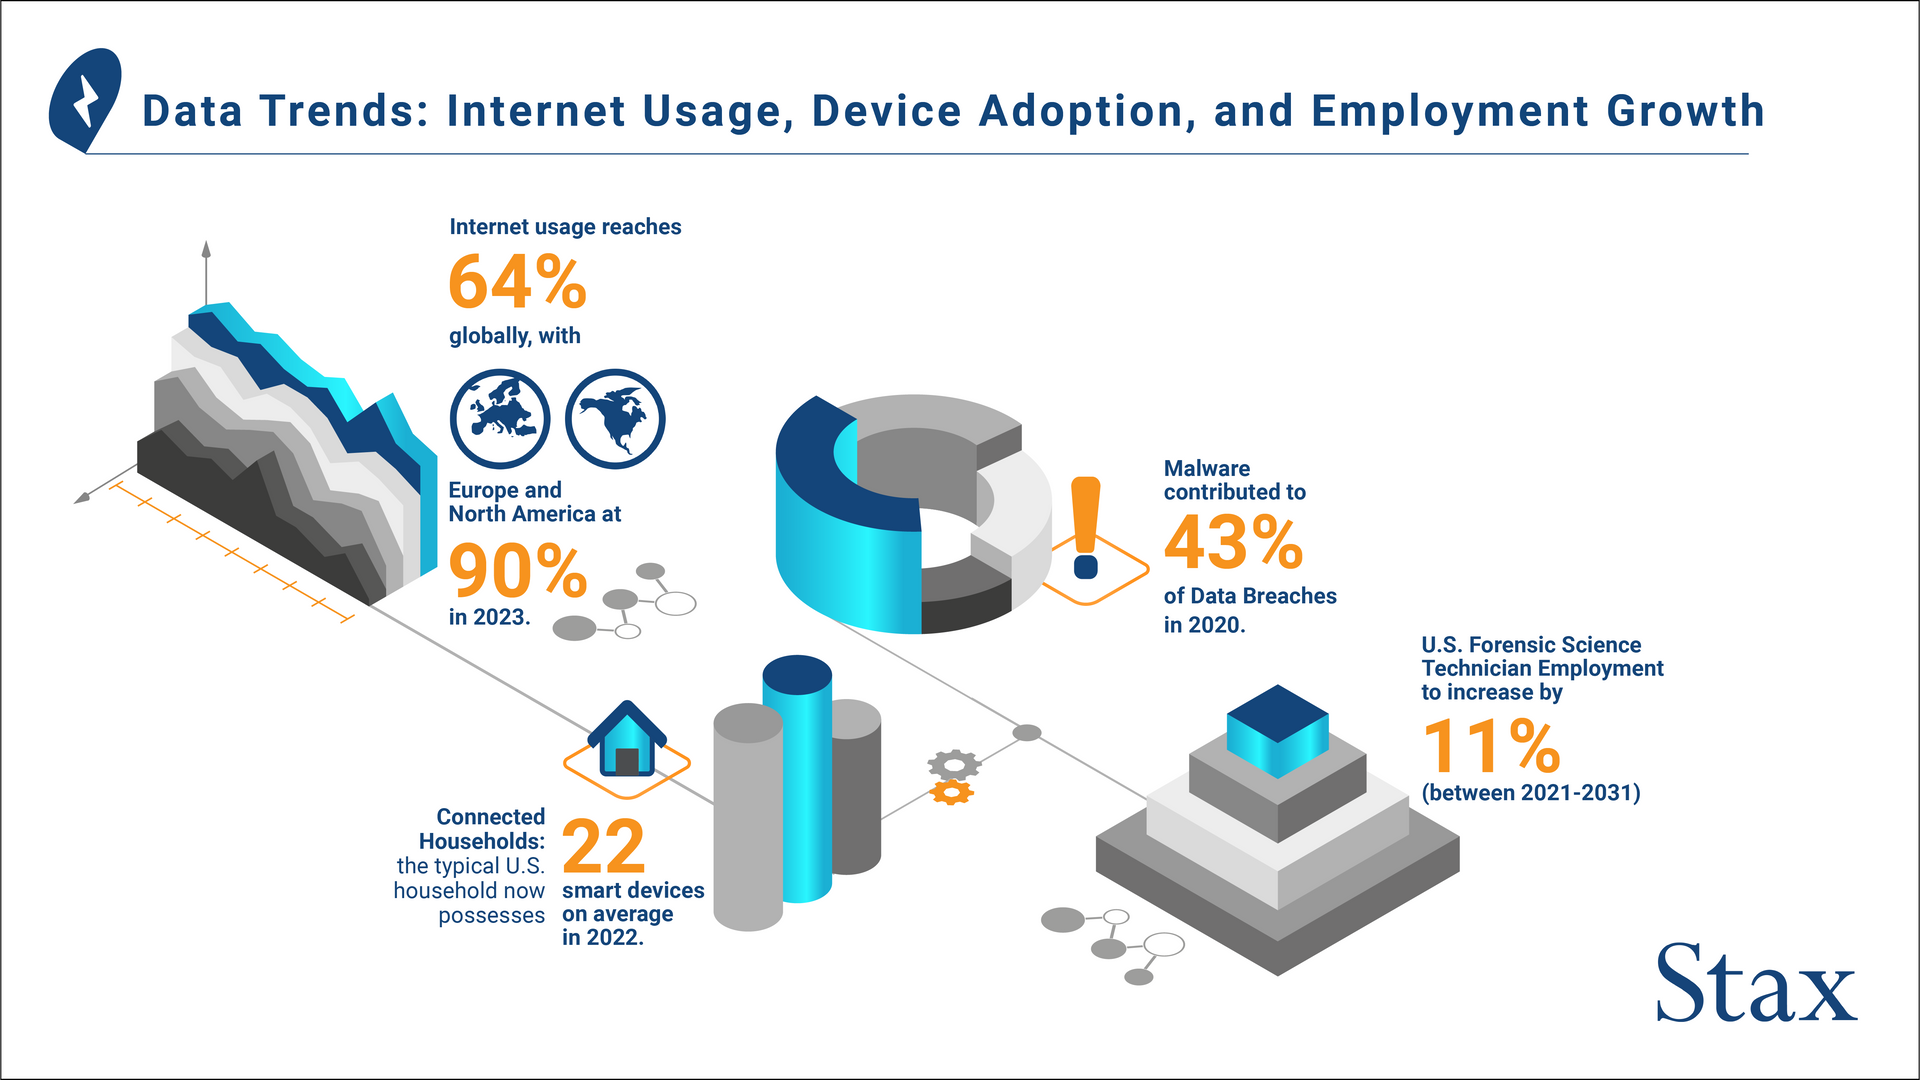 Infographic describing data trends: internet useage, device adoption, and employment growth. Internet useage reaches 64% globally with Europe and North America at 90% in 2023. In 2022, a typical US household has, on average,  22 smart devices. In 2020, malware contributed to 43% of data breaches. From 2021-2031, US forensic science technician employment is expected to increase by 11%.